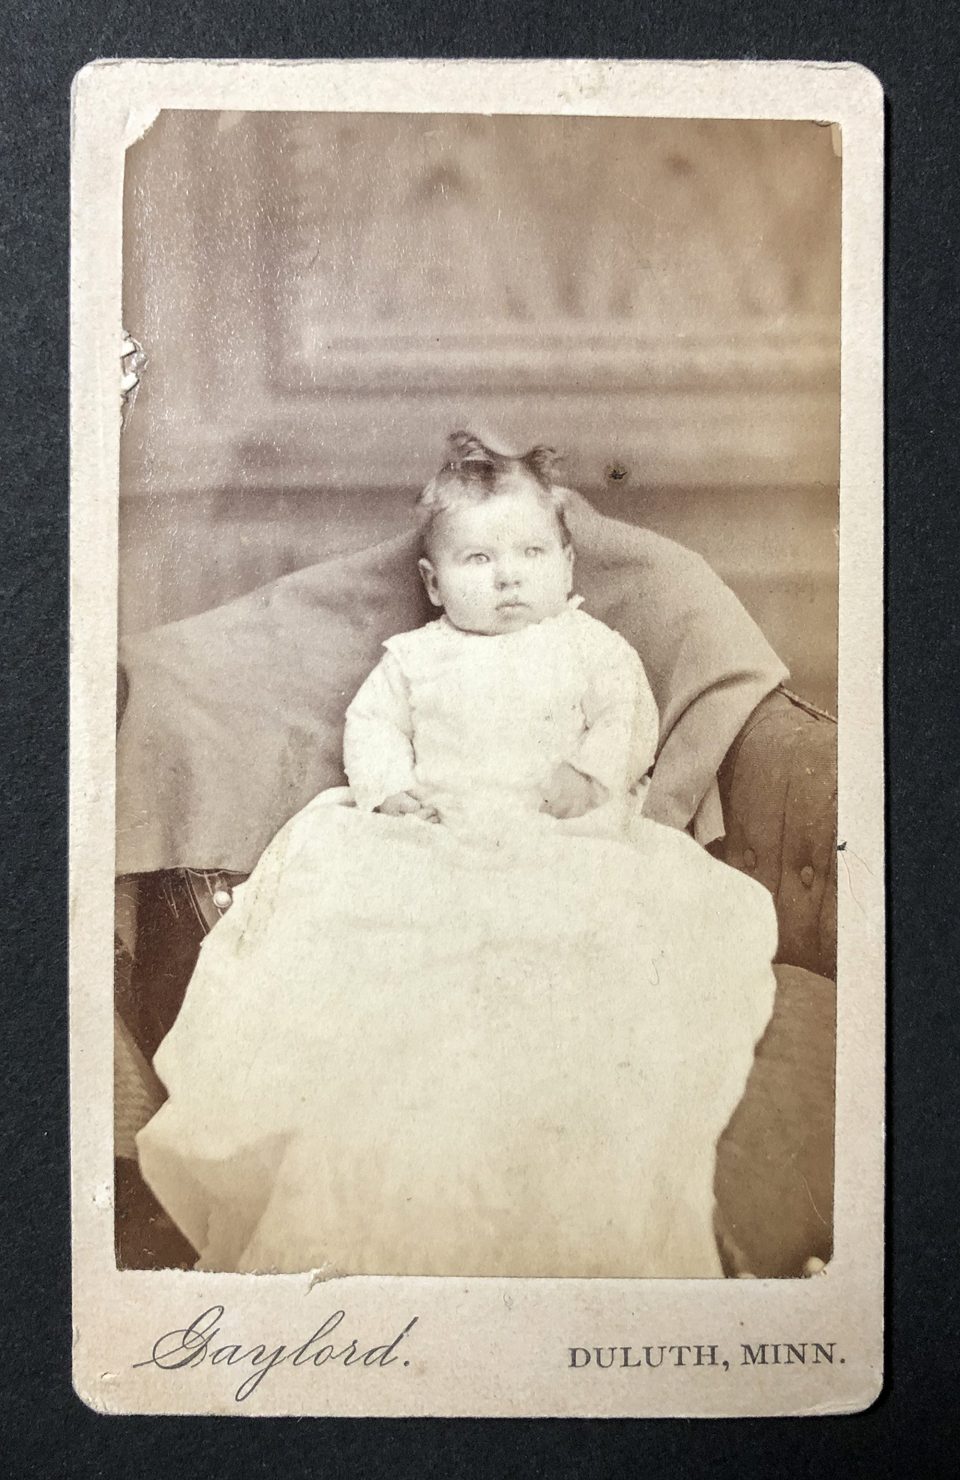 Portrait of an infant girl in a long gown made by the Gaylord studio of Duluth